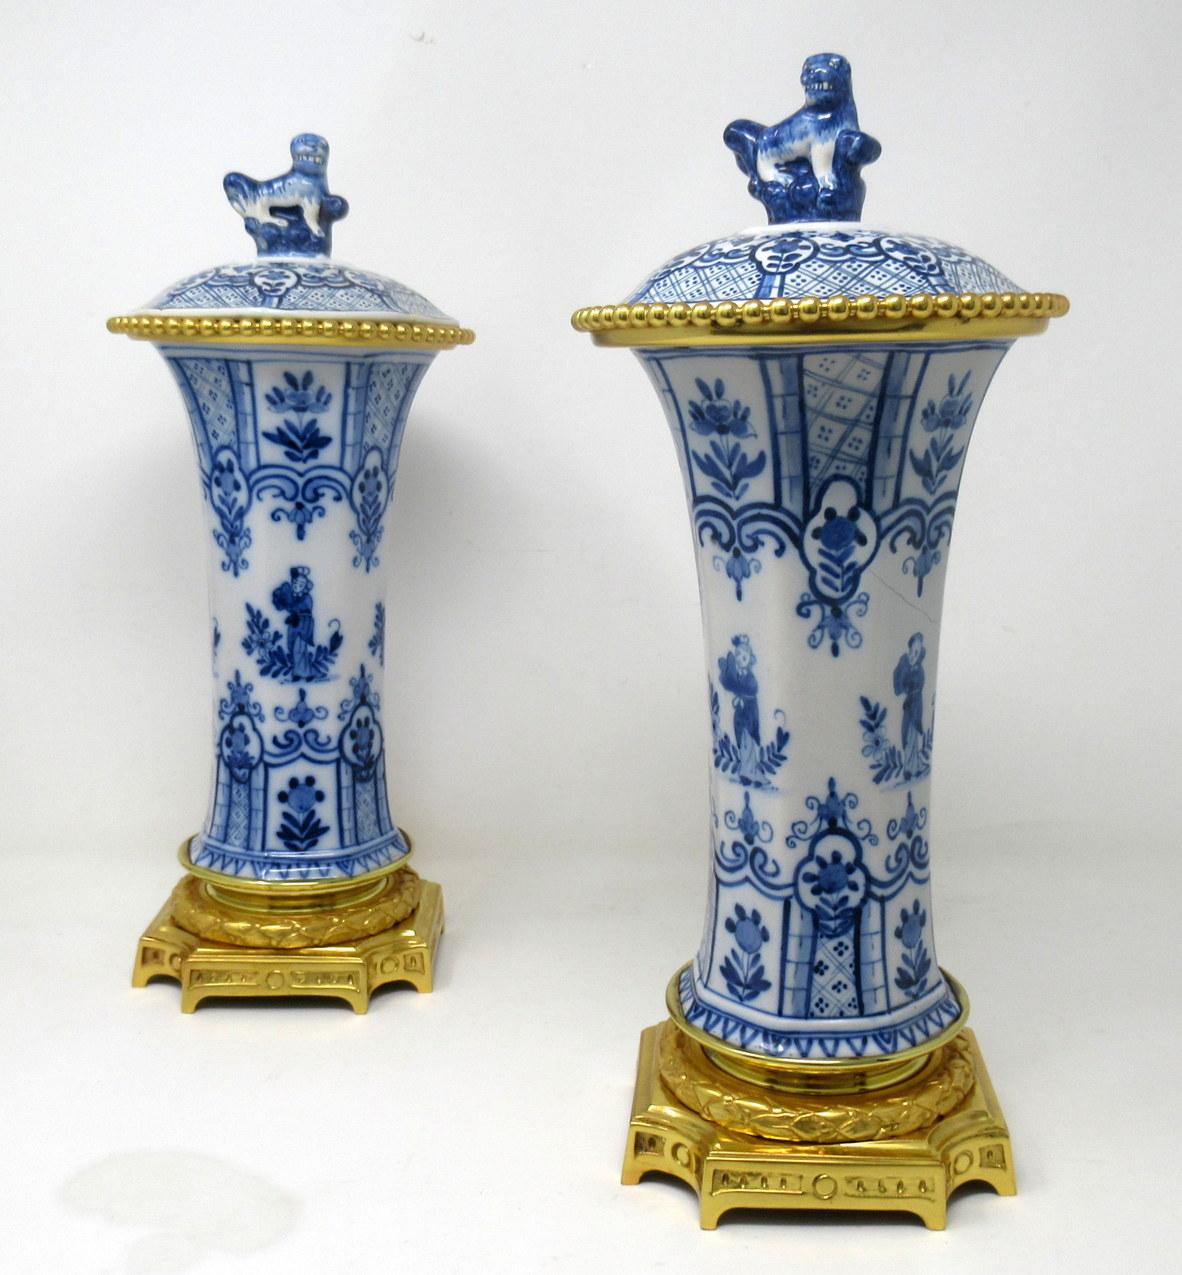 An exceptionally fine example of a pair of Chinese Export blue and white lidded urns of waisted form with octagonal outline and good size proportions. Third quarter of the nineteenth century.

Each Vase hand painted with elaborate scenes of